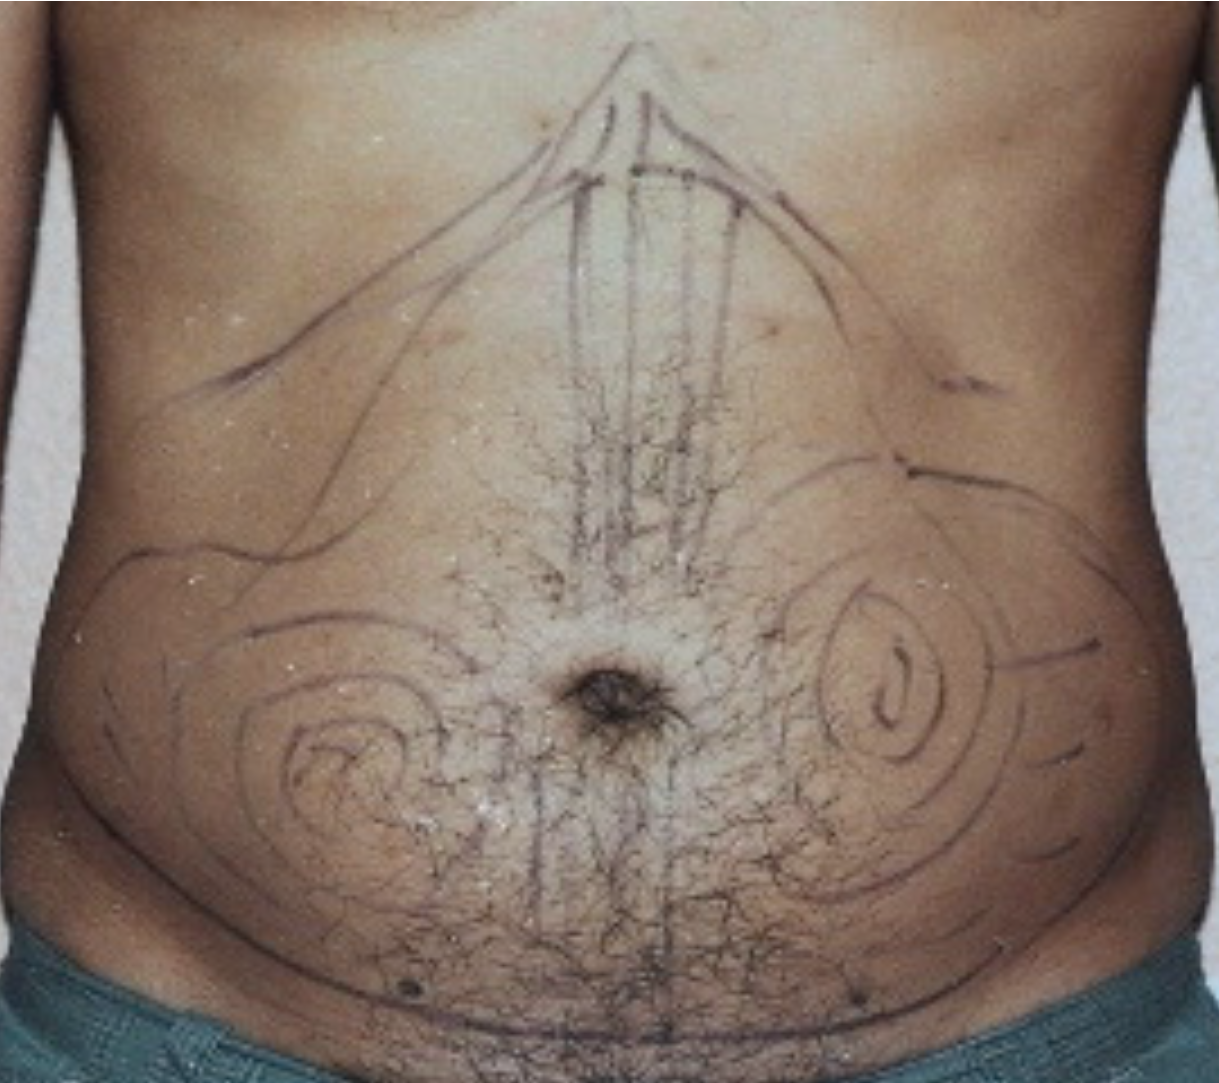 A close up of a man 's stomach with a drawing on it